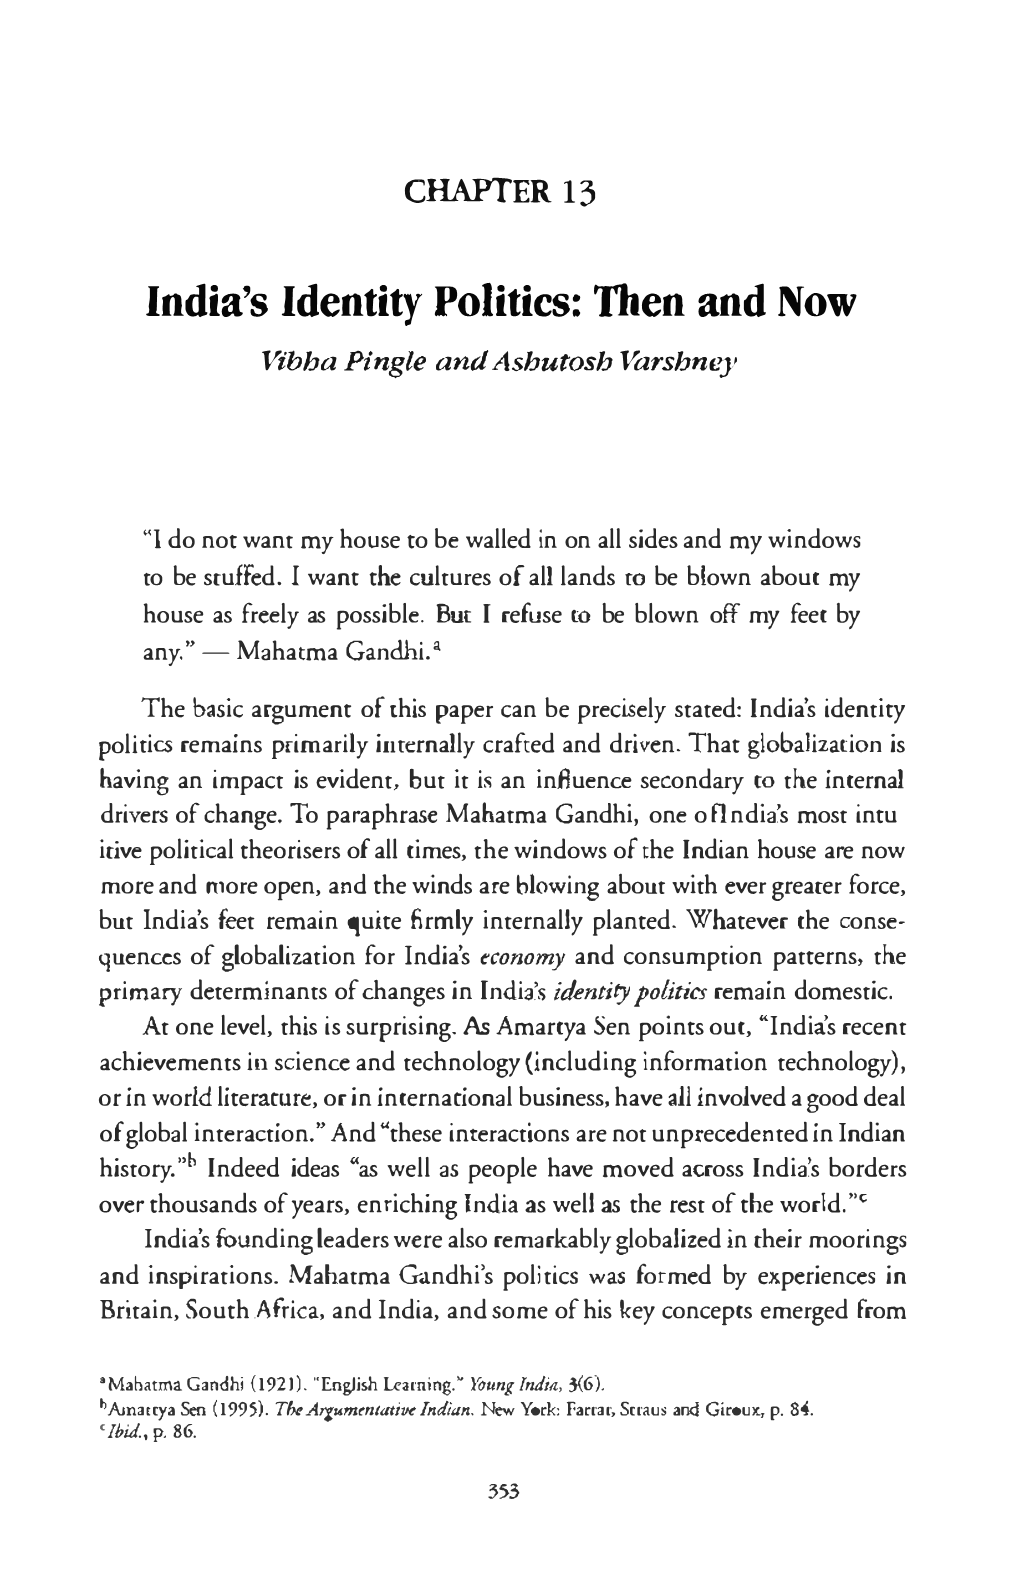 India's Identity Politics: Then and Now